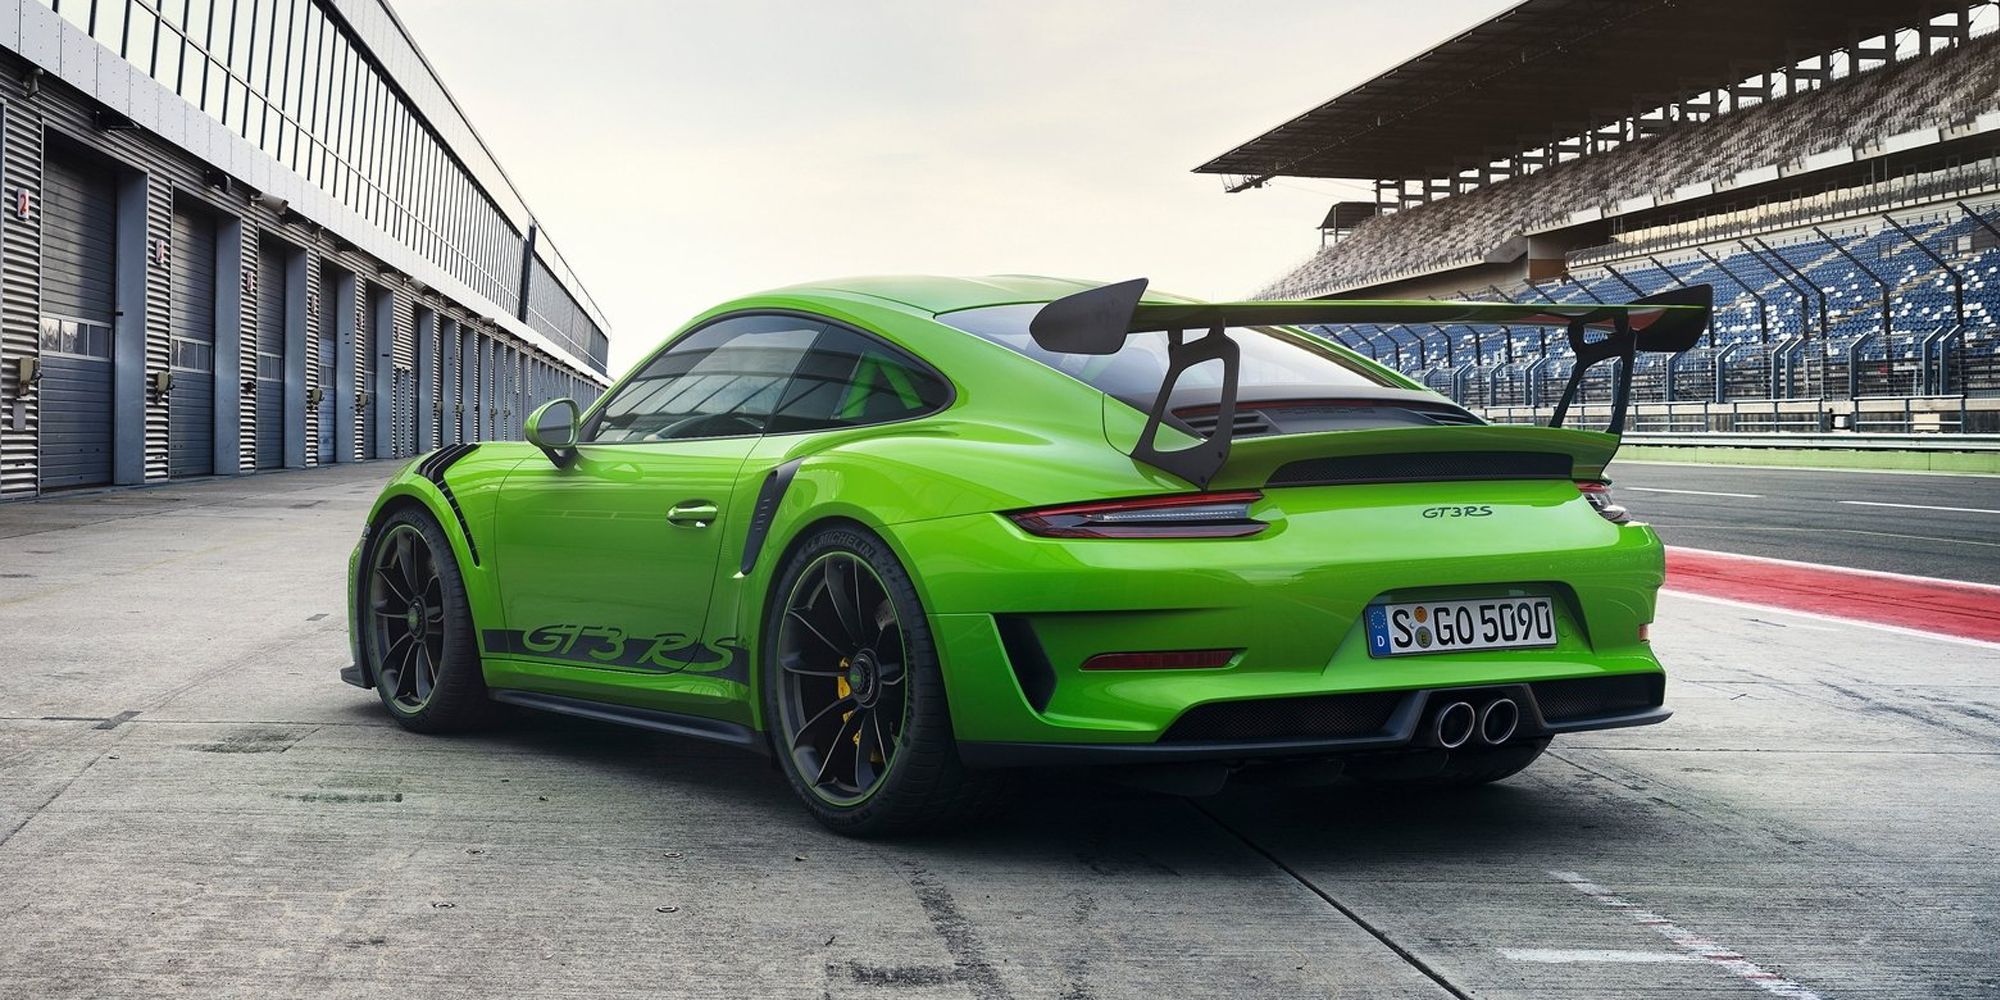 Rear 3/4 view of a green 911 GT3 RS in the pit lane